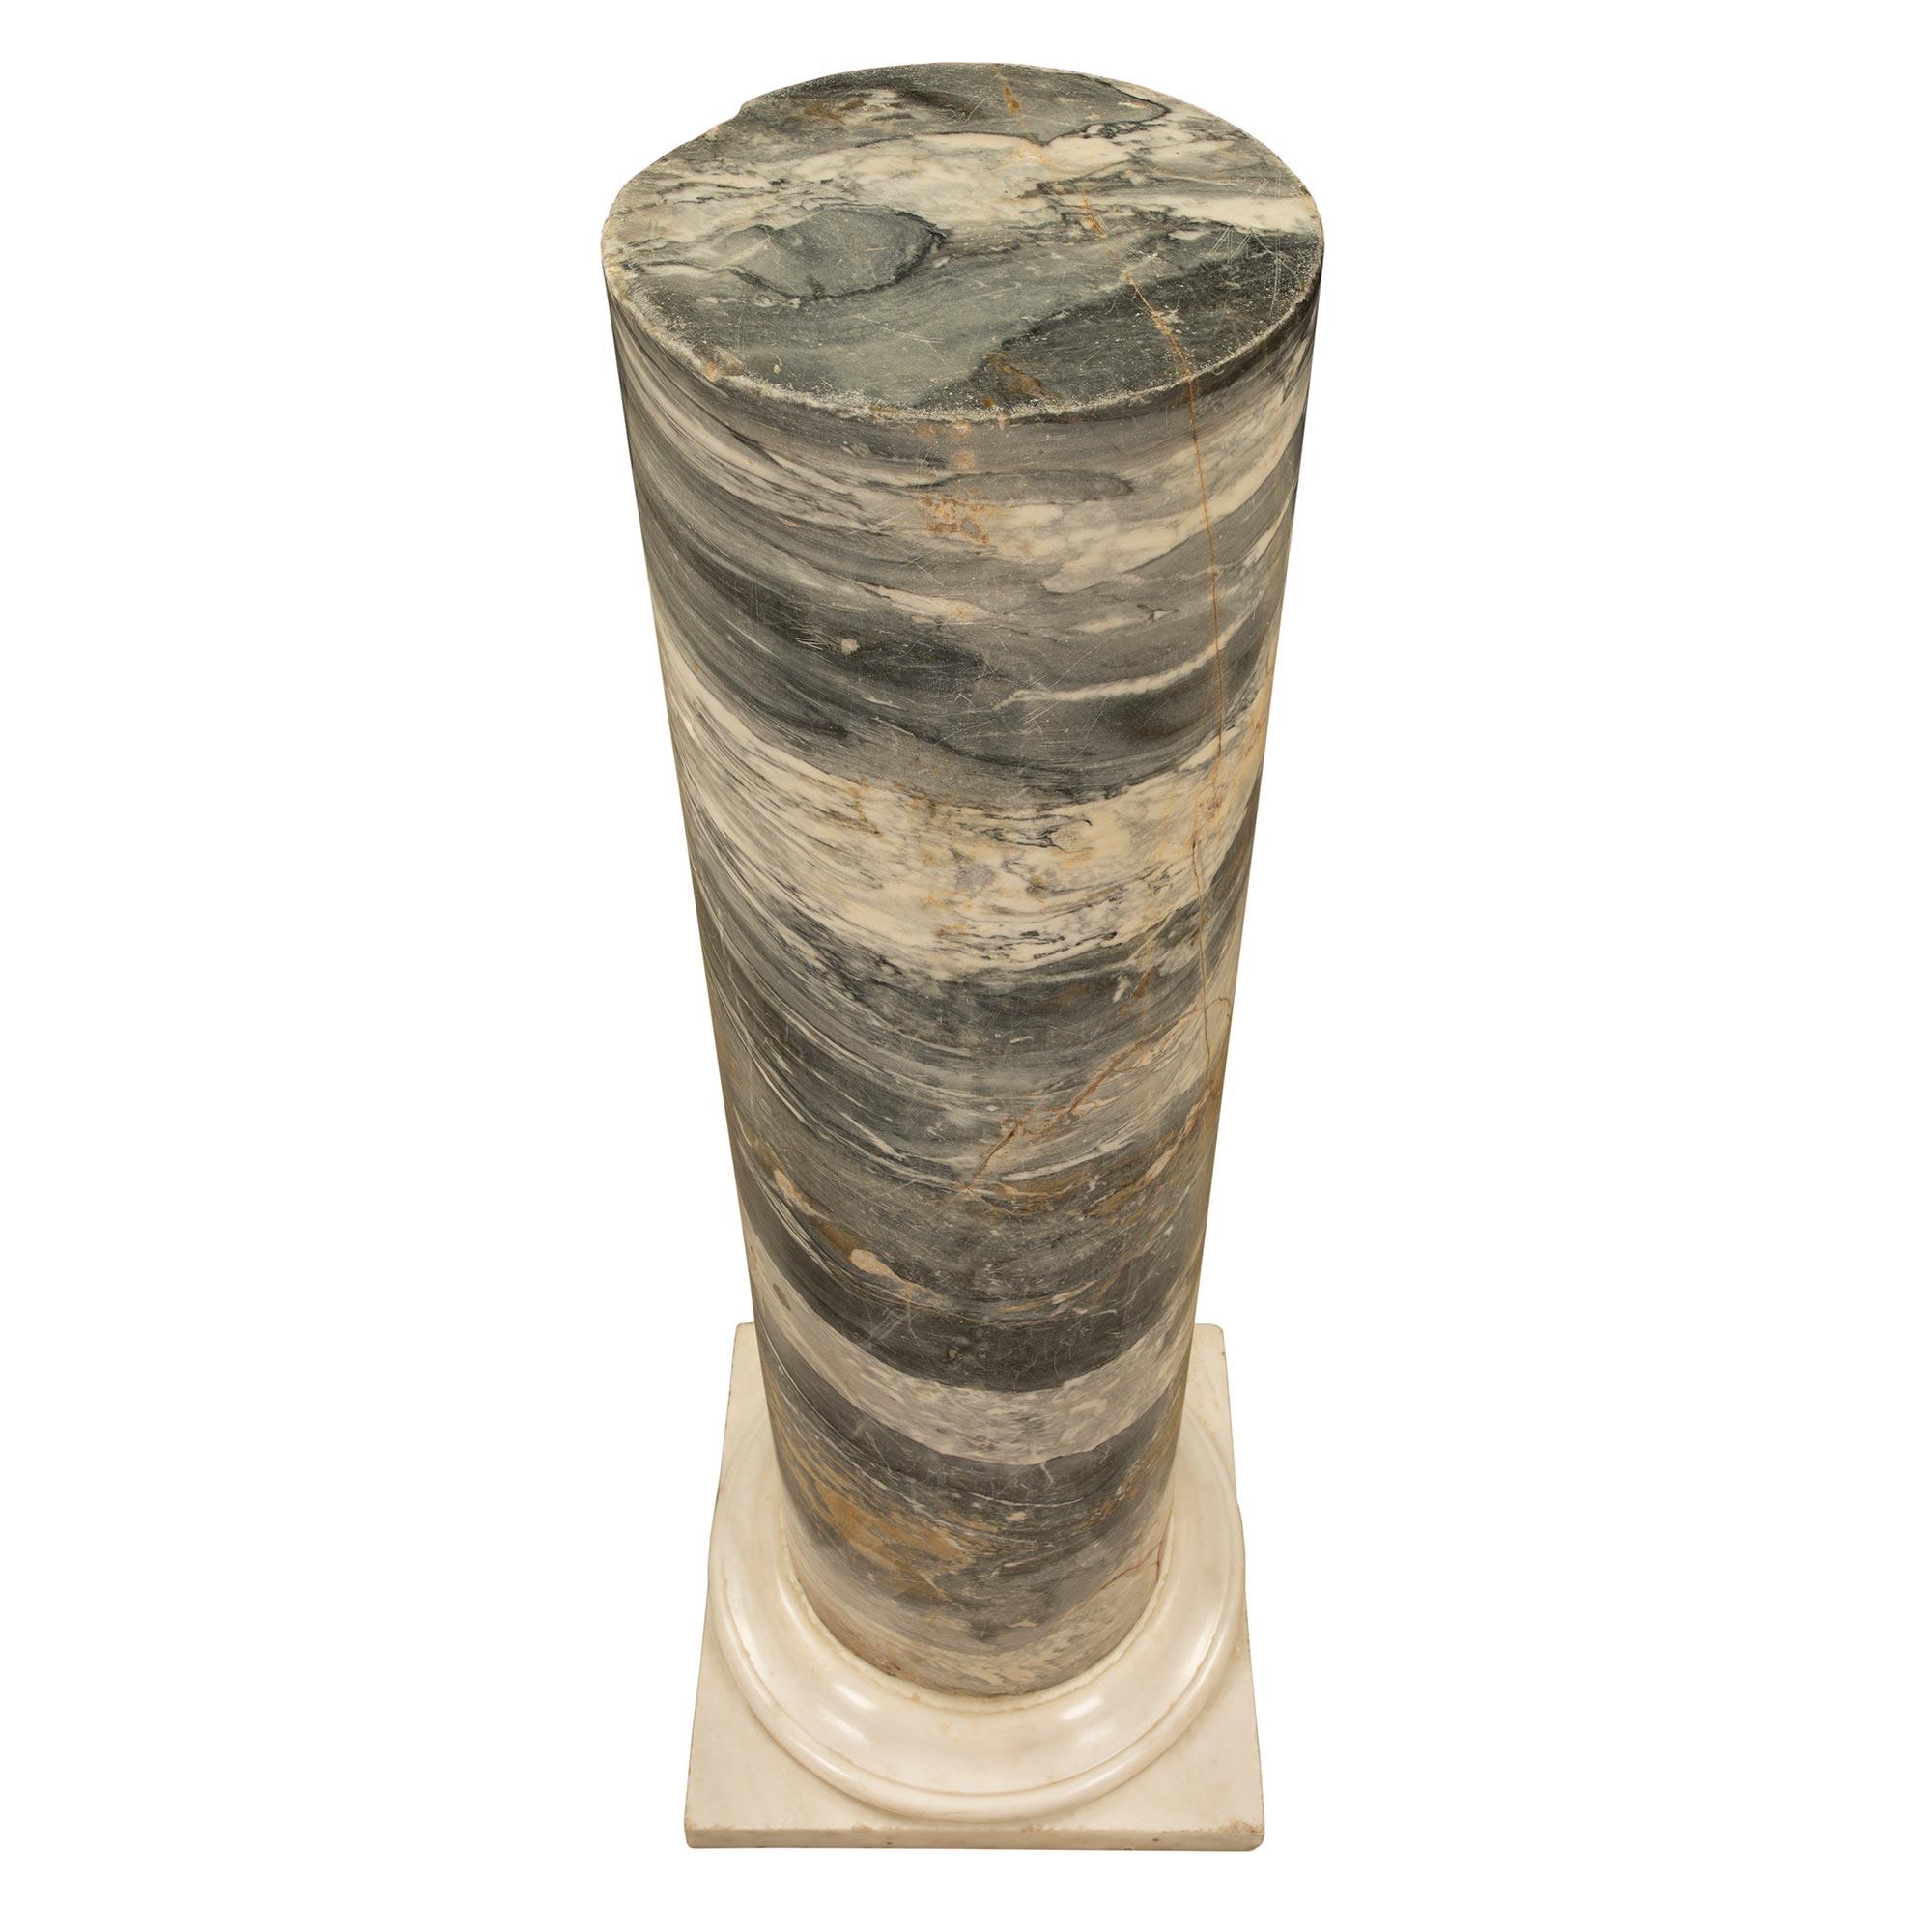 A striking Italian 19th century Neo-Classical st. solid marble column. The column is raised by a square white Carrara marble base with a fine and most decorative mottled design. The circular central column showcases a beautiful and most unique